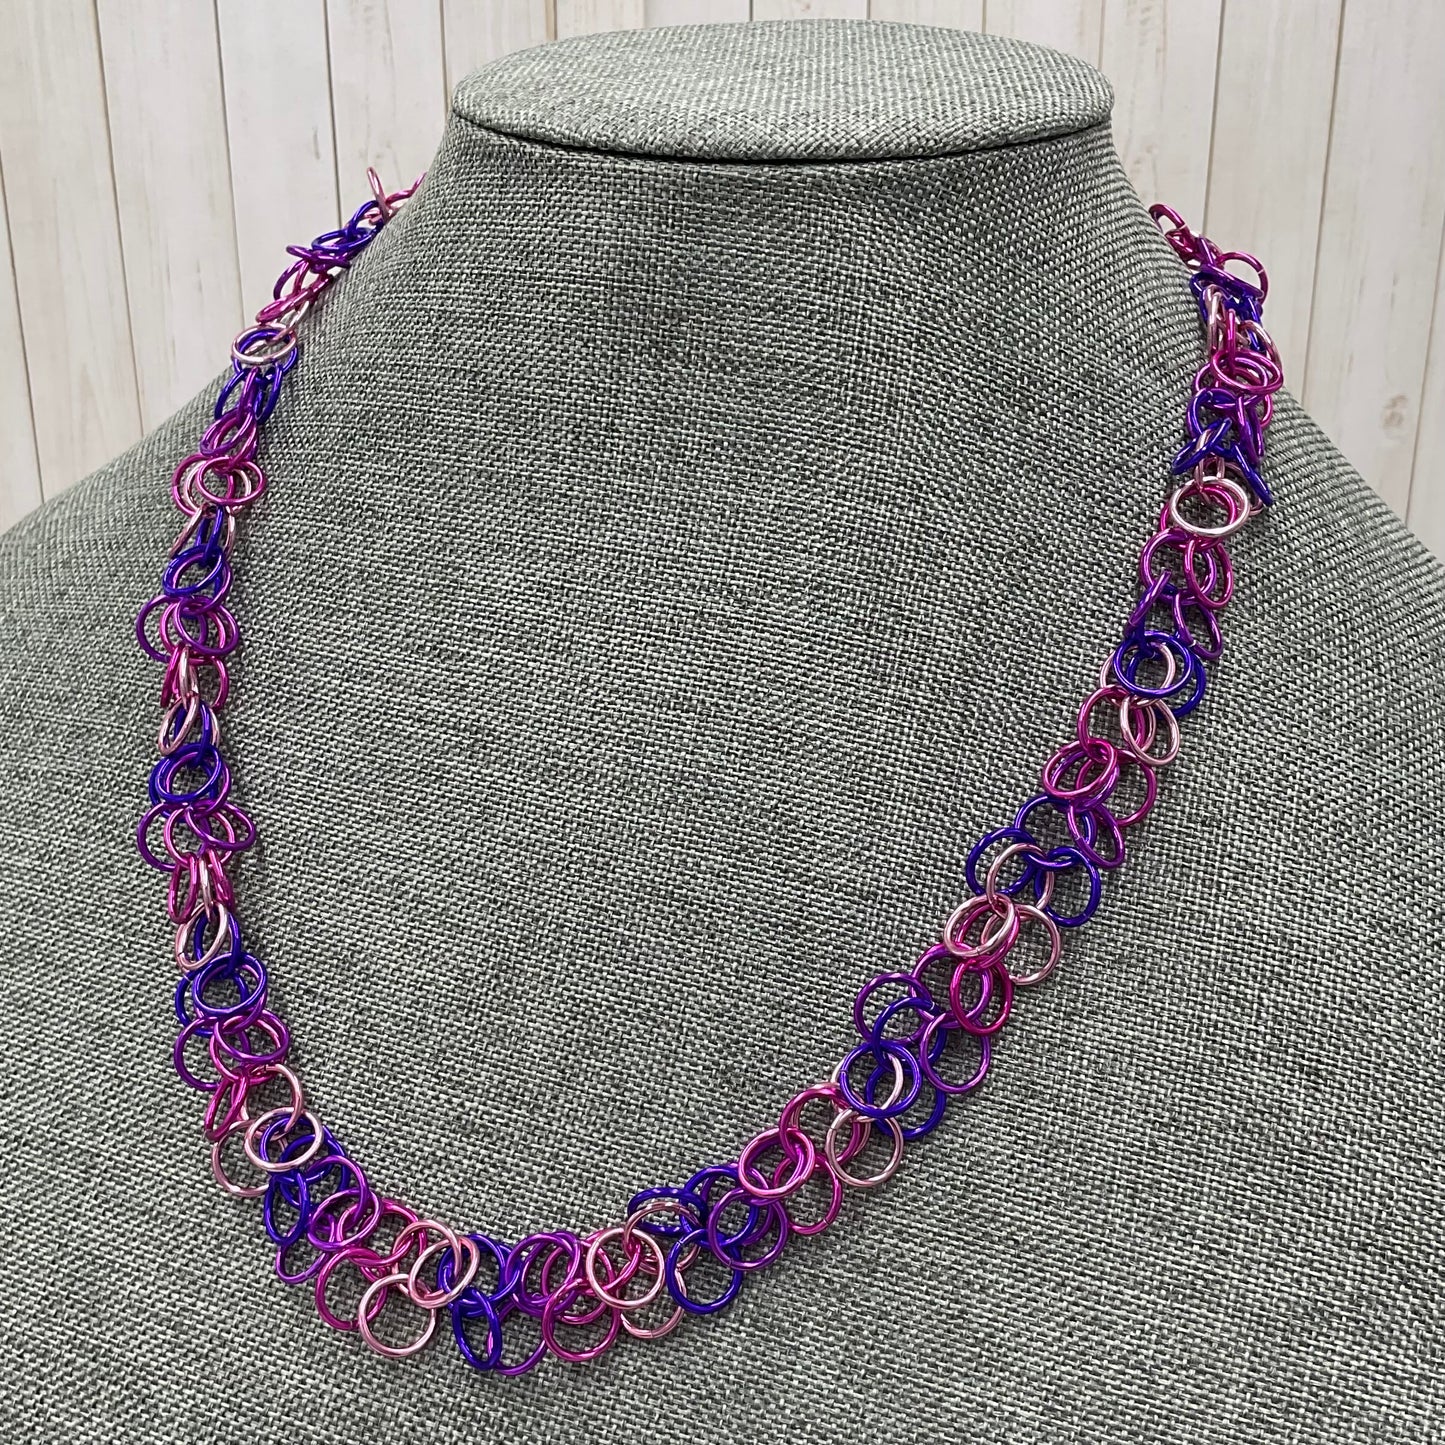 Shades Of Pink & Purple Shaggy Chain